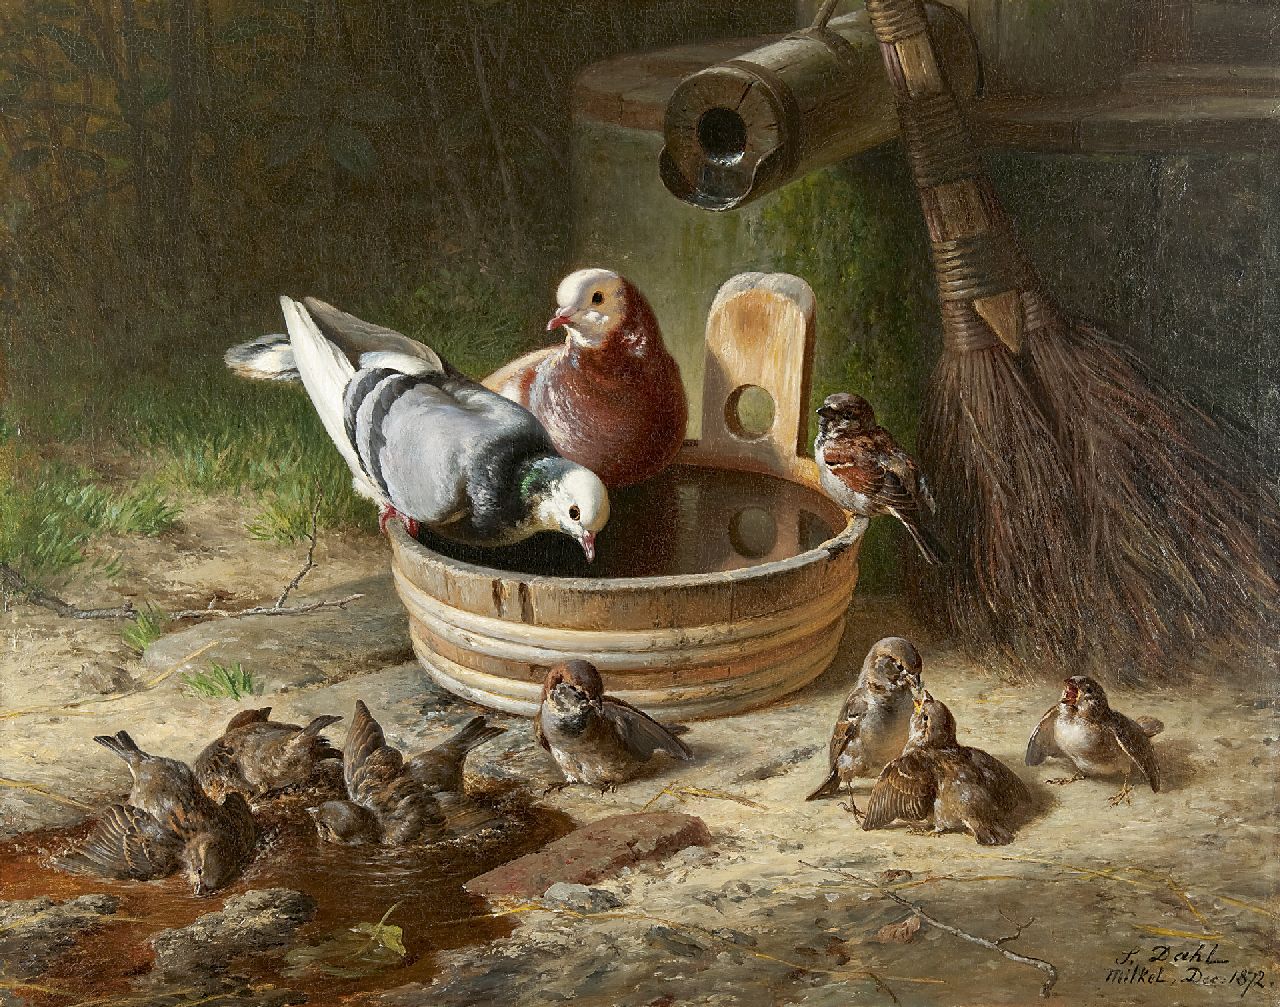 Hans Dahl | Drinking pigeons and sparrows, oil on canvas, 70.7 x 90.0 cm, signed l.r. and dated 'Milkel' Dec. 1872